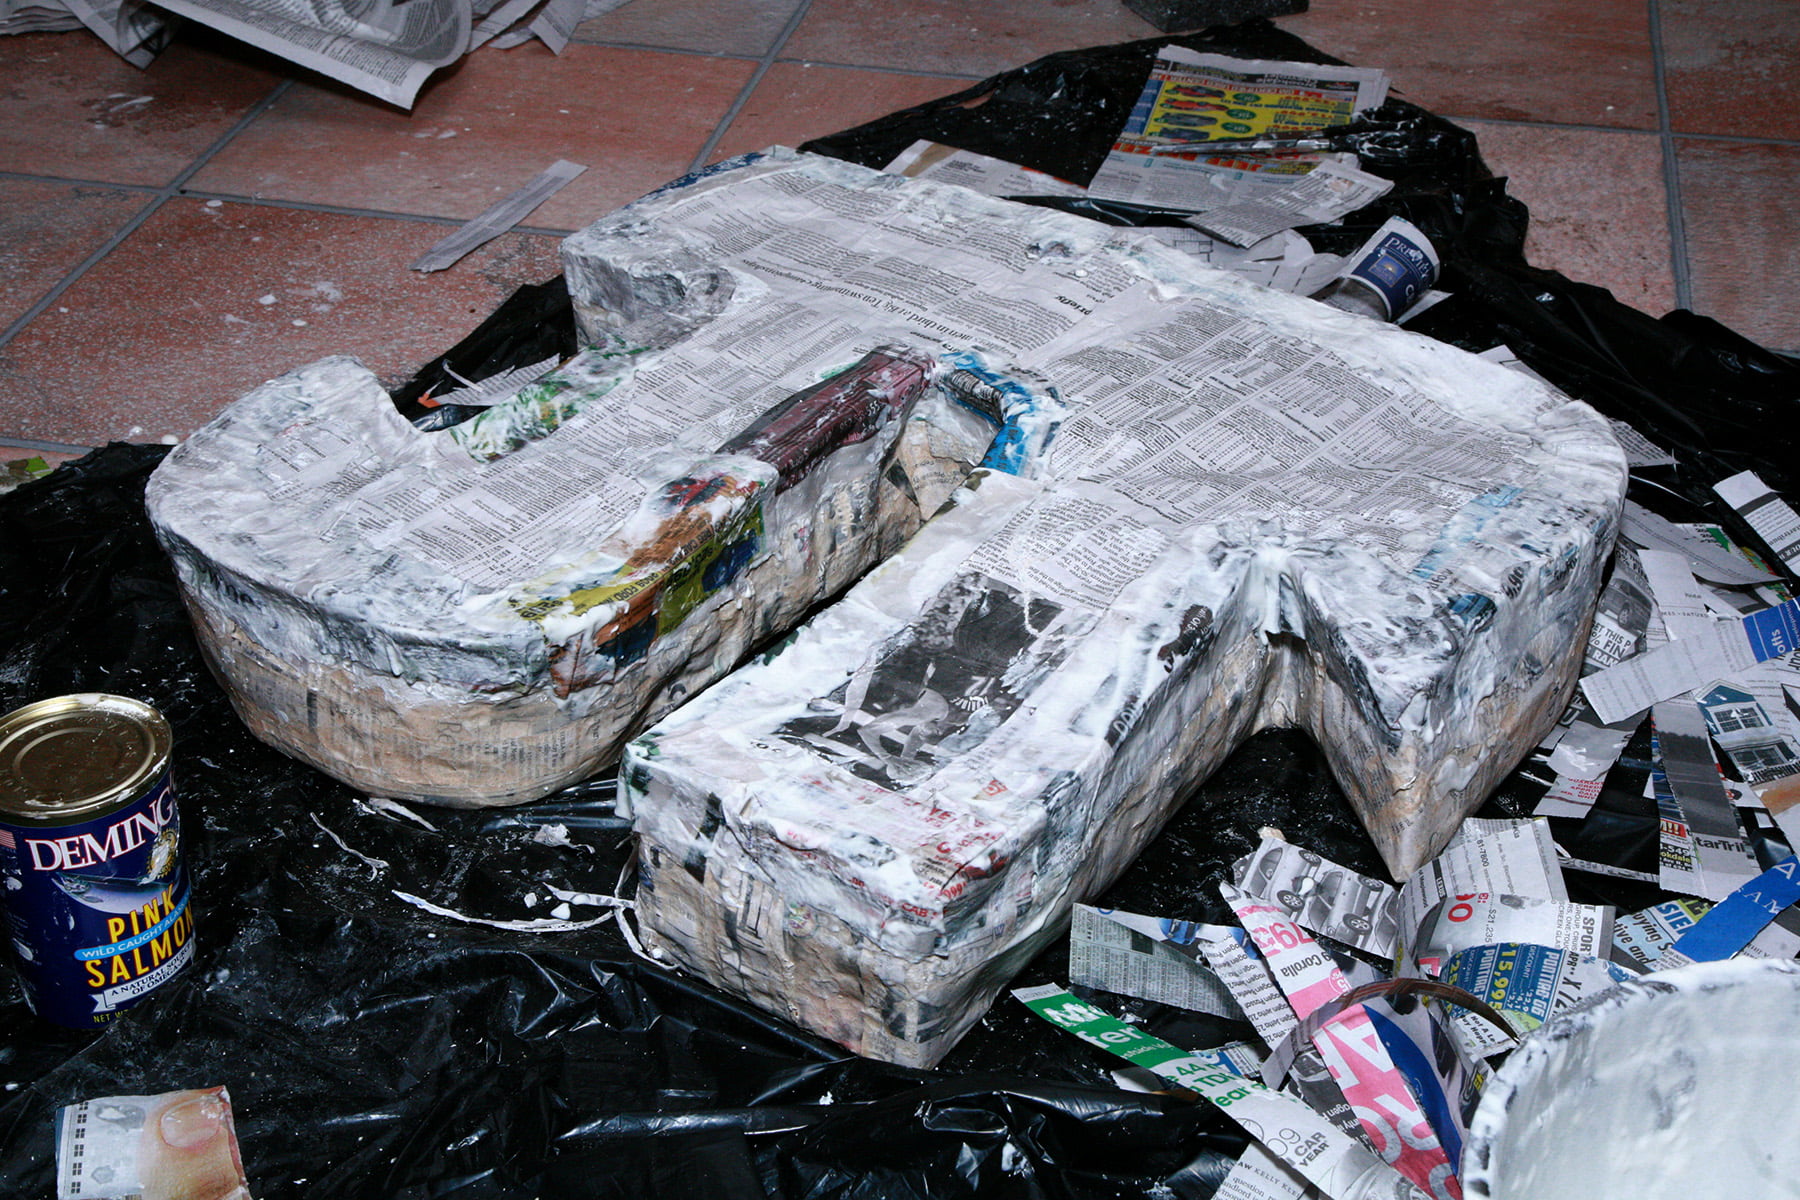 The paper machee pinata is shown with all edges sealed shut with more paper mache.